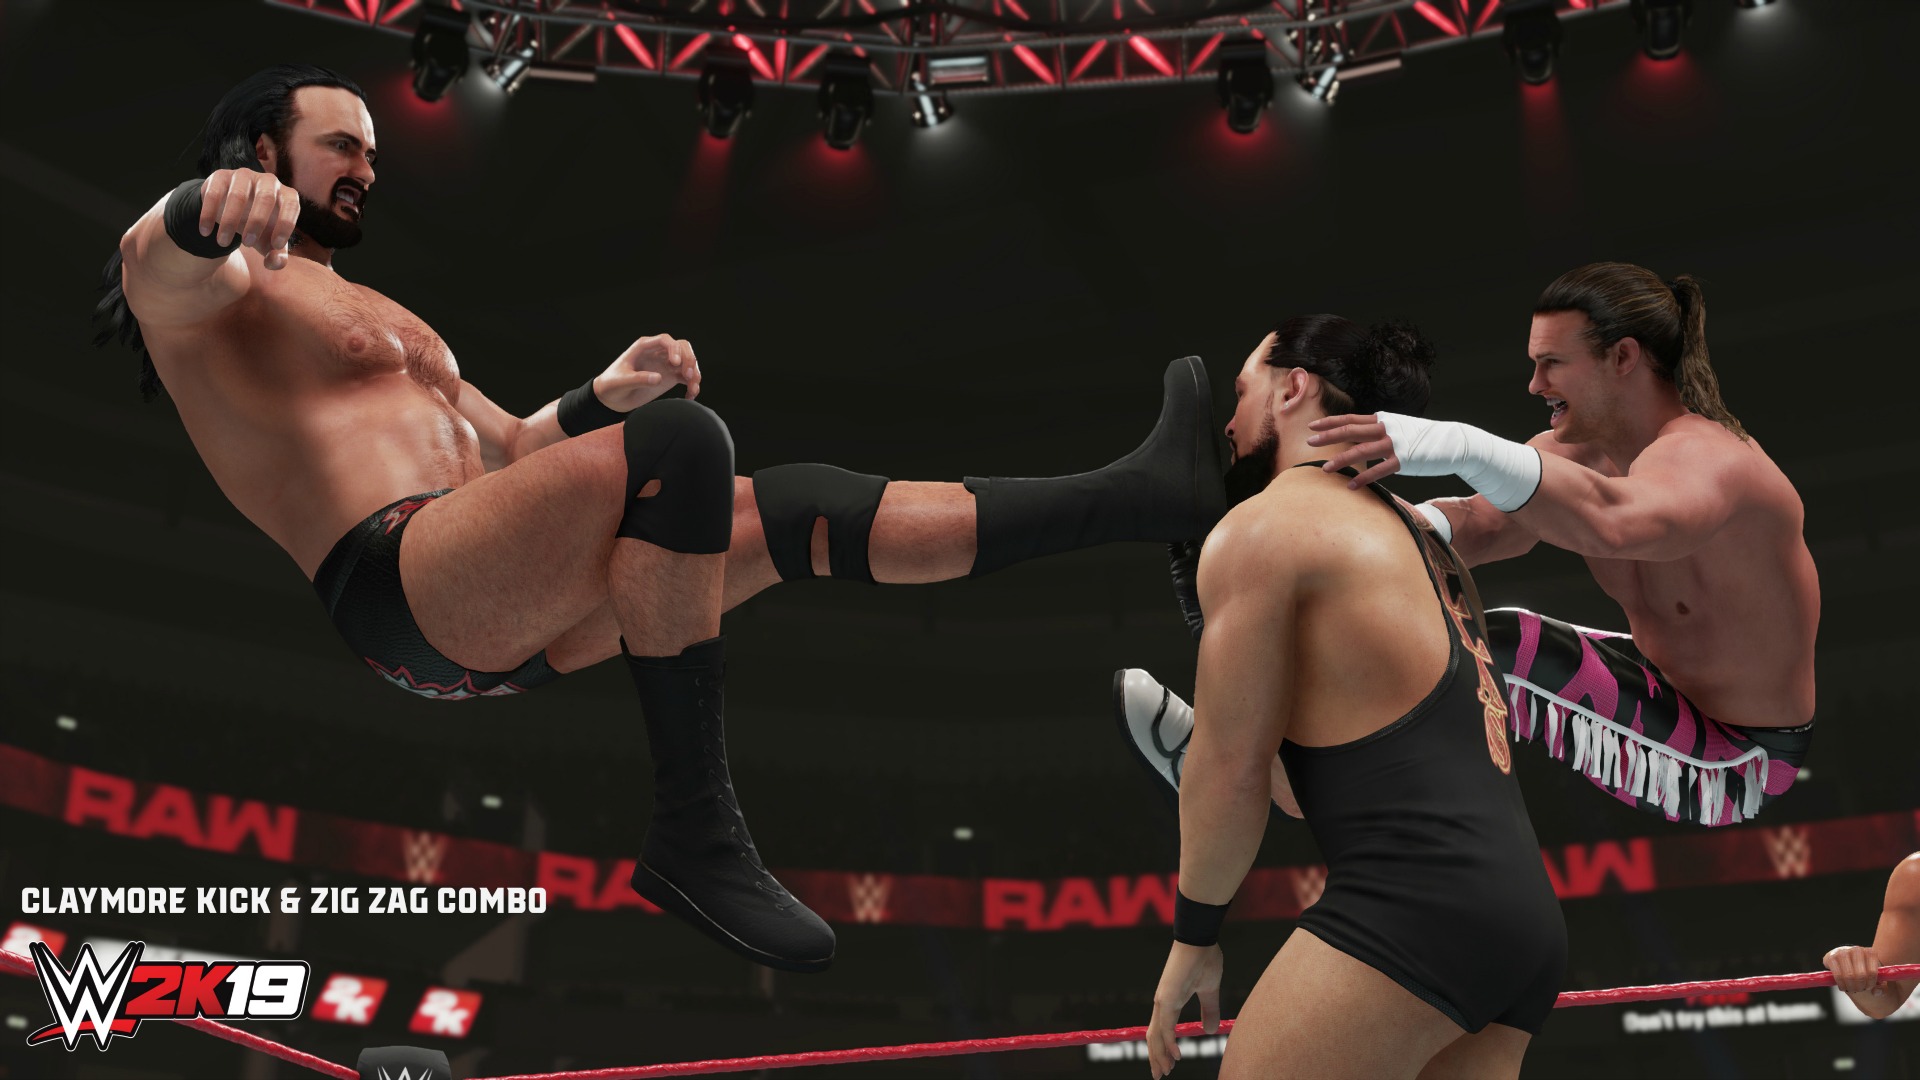 2K Games Releases New Details About The WWE 2K19 New Moves Pack DLC